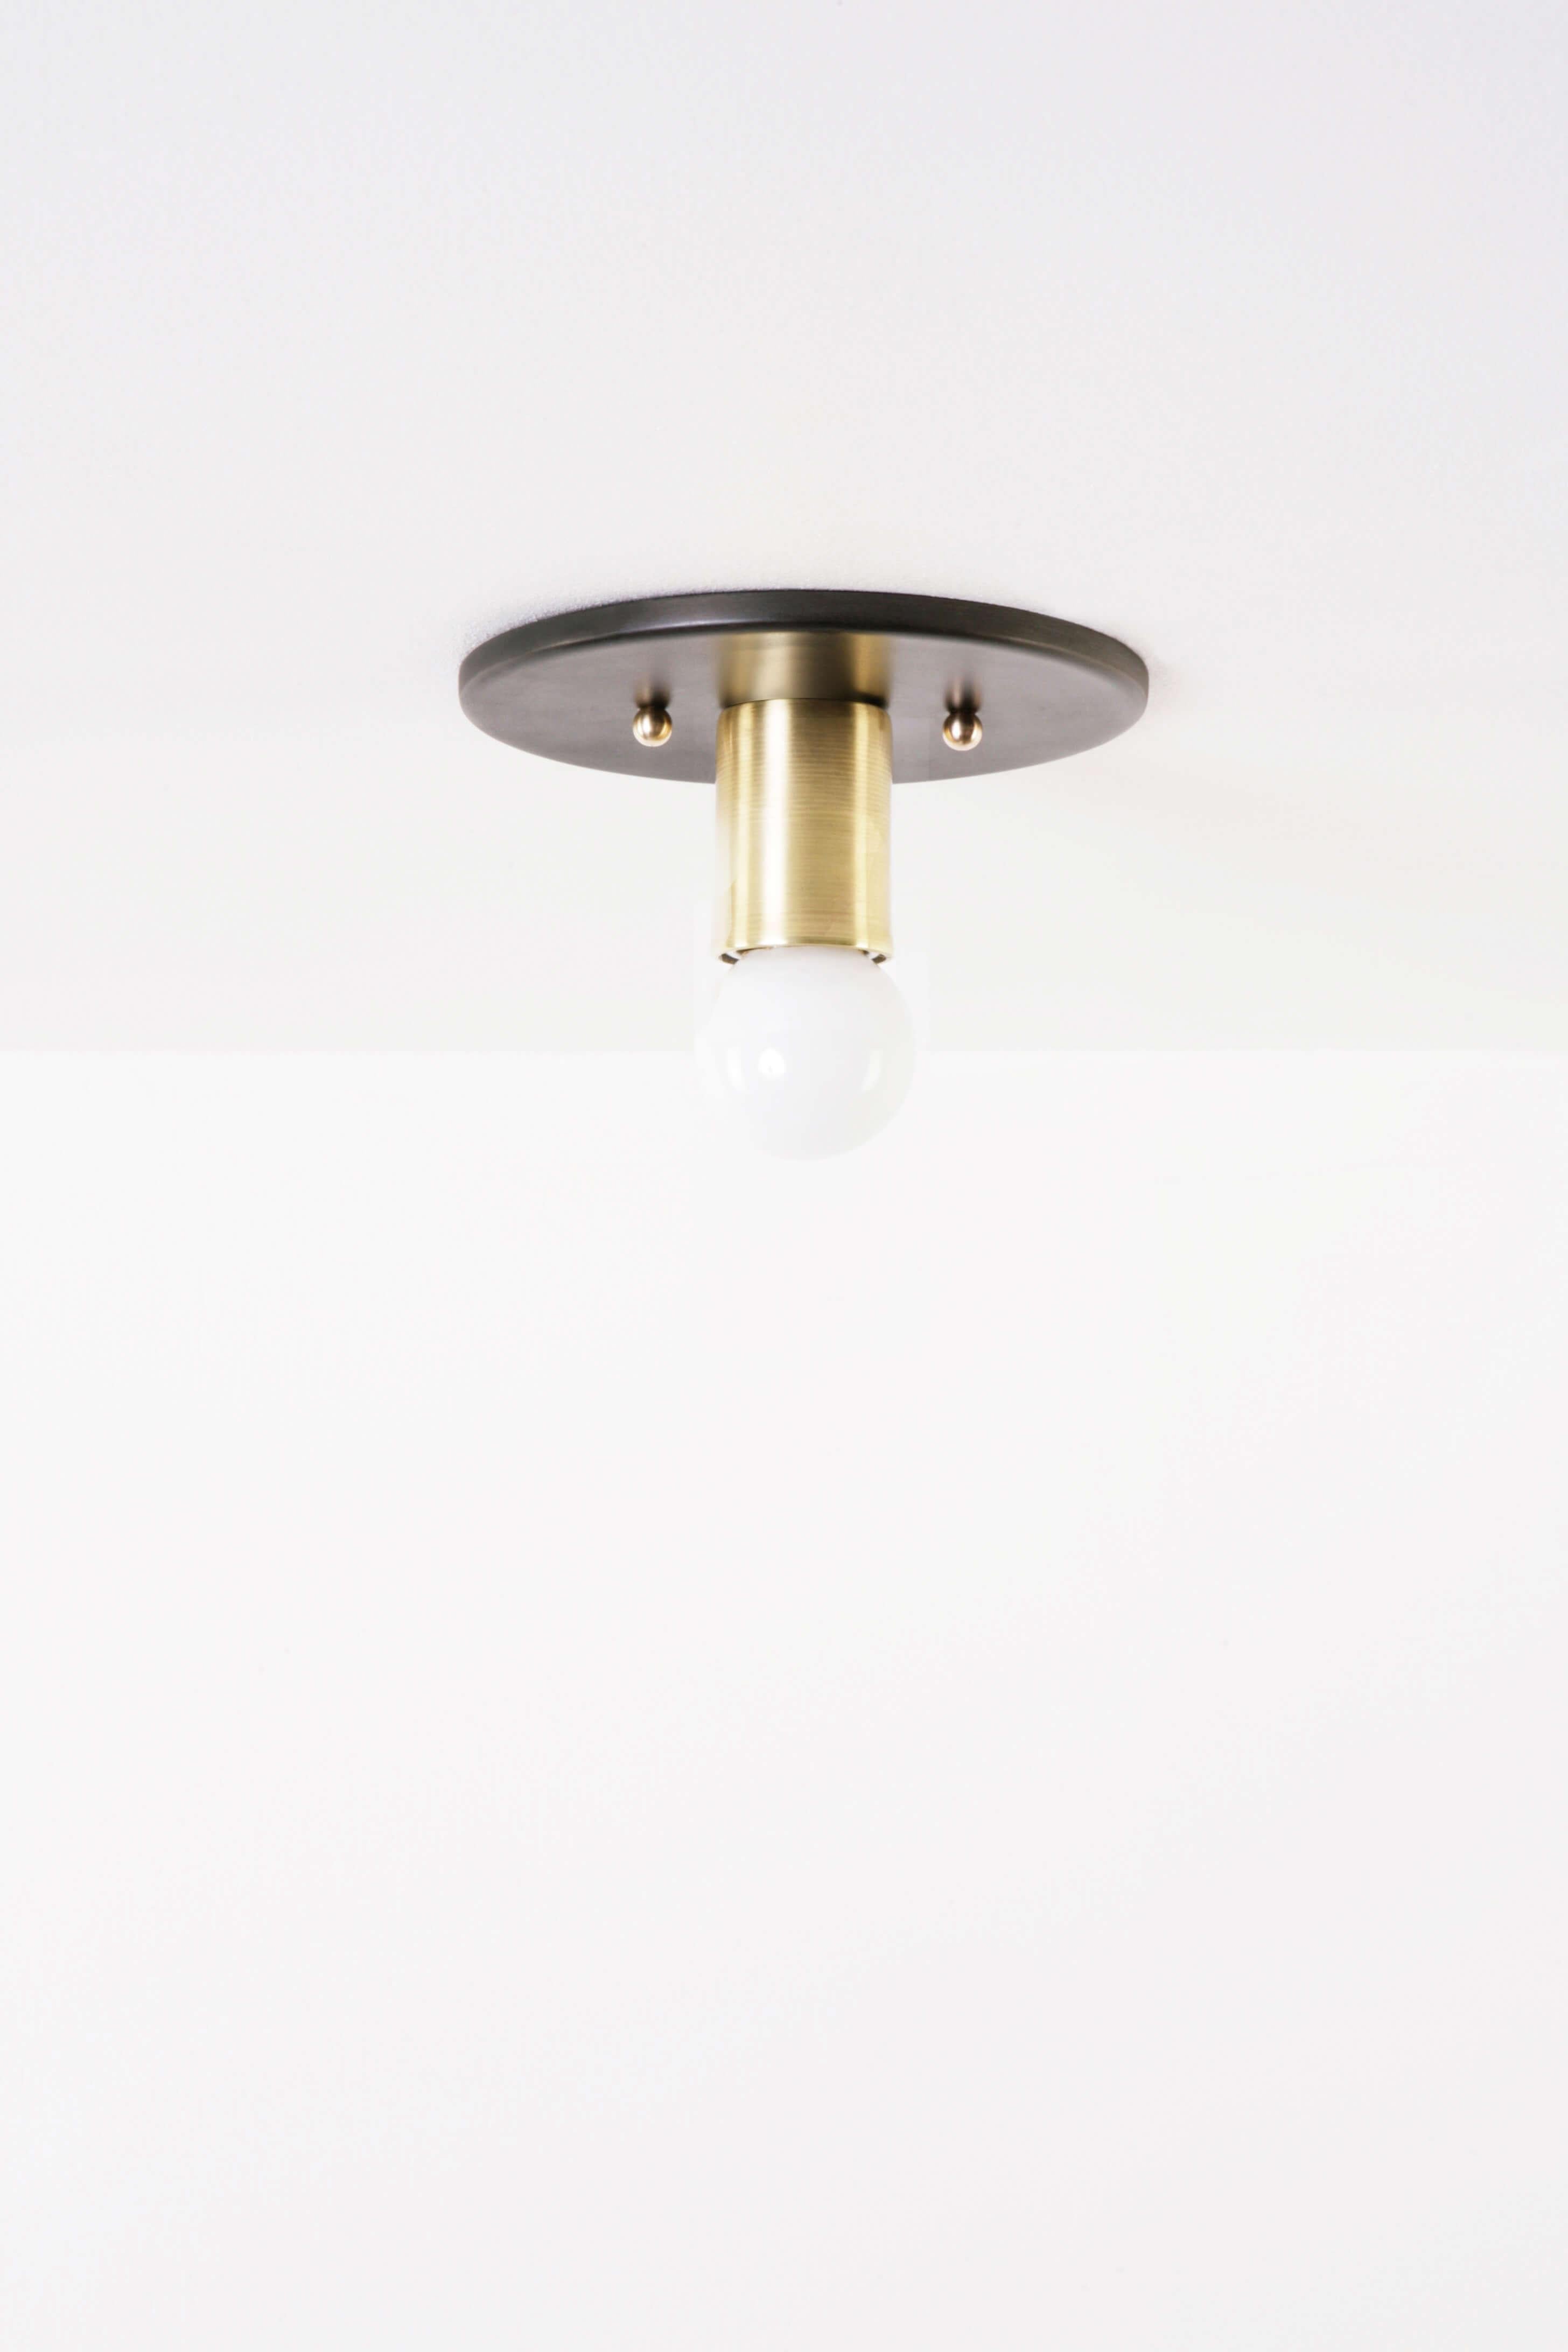 Small: W 6in (15cm) x D 2.25in (6cm) x H 6in (15cm)

The Louis flush mount is fabricated with a darkened steel flat canopy and a solid brass or darkened steel extension. This flush mount comes with brass ball screws.

(1) 60W Medium Base